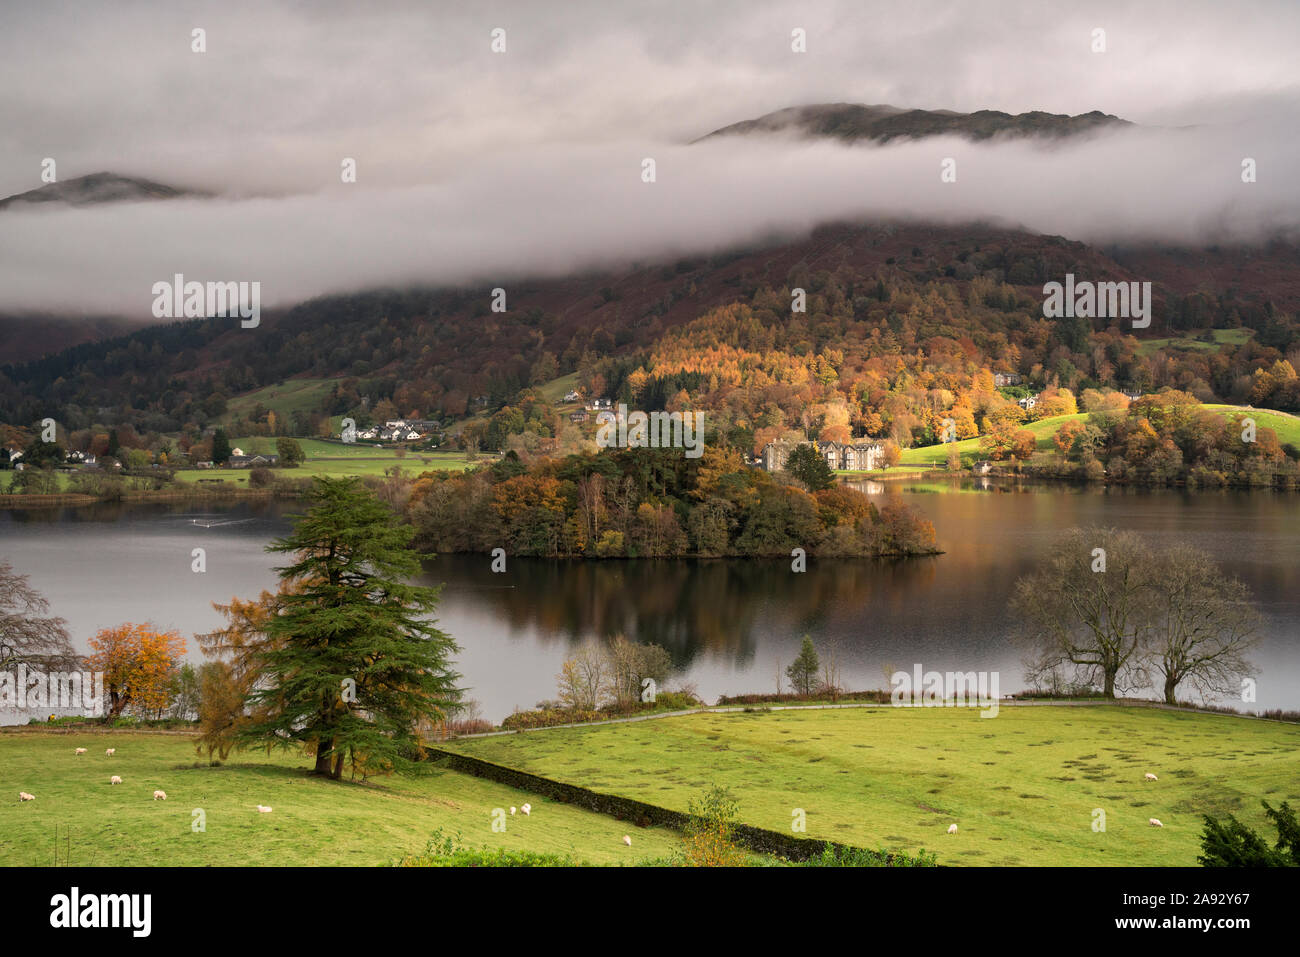 Sunshine breaking through low cloud and mist over Grasmere island in the middle of Grasmere lake on a rainy autumnal day Stock Photo